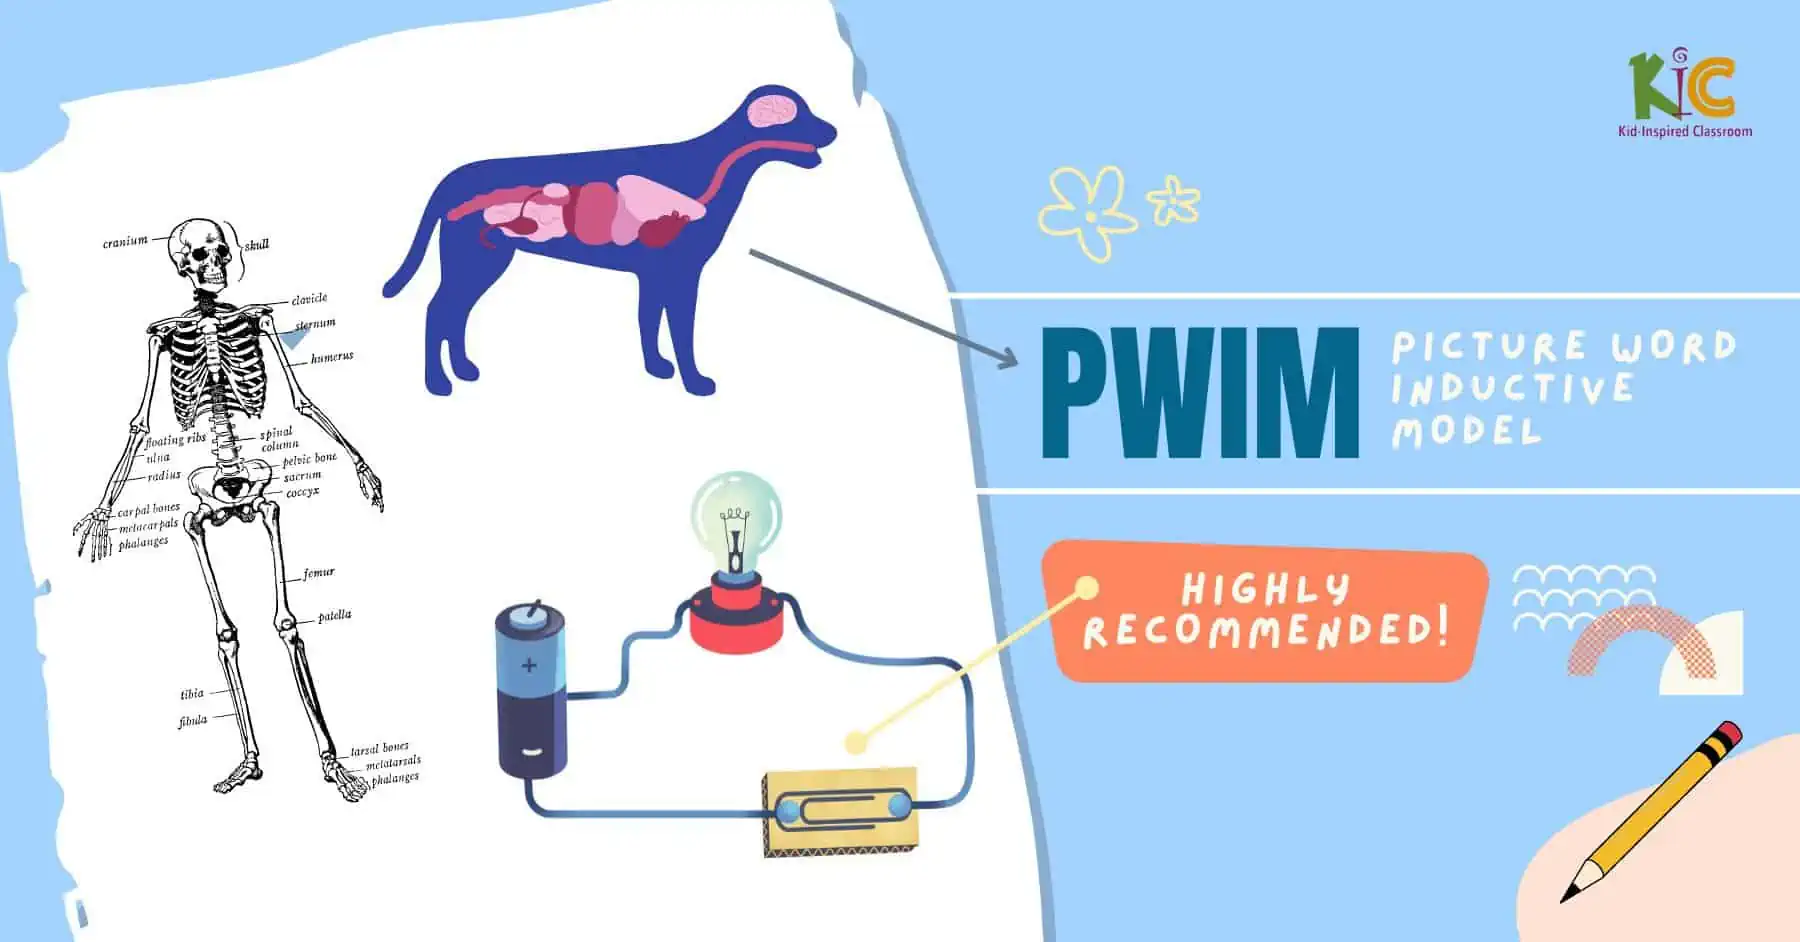 Pwm picture word inductive model.